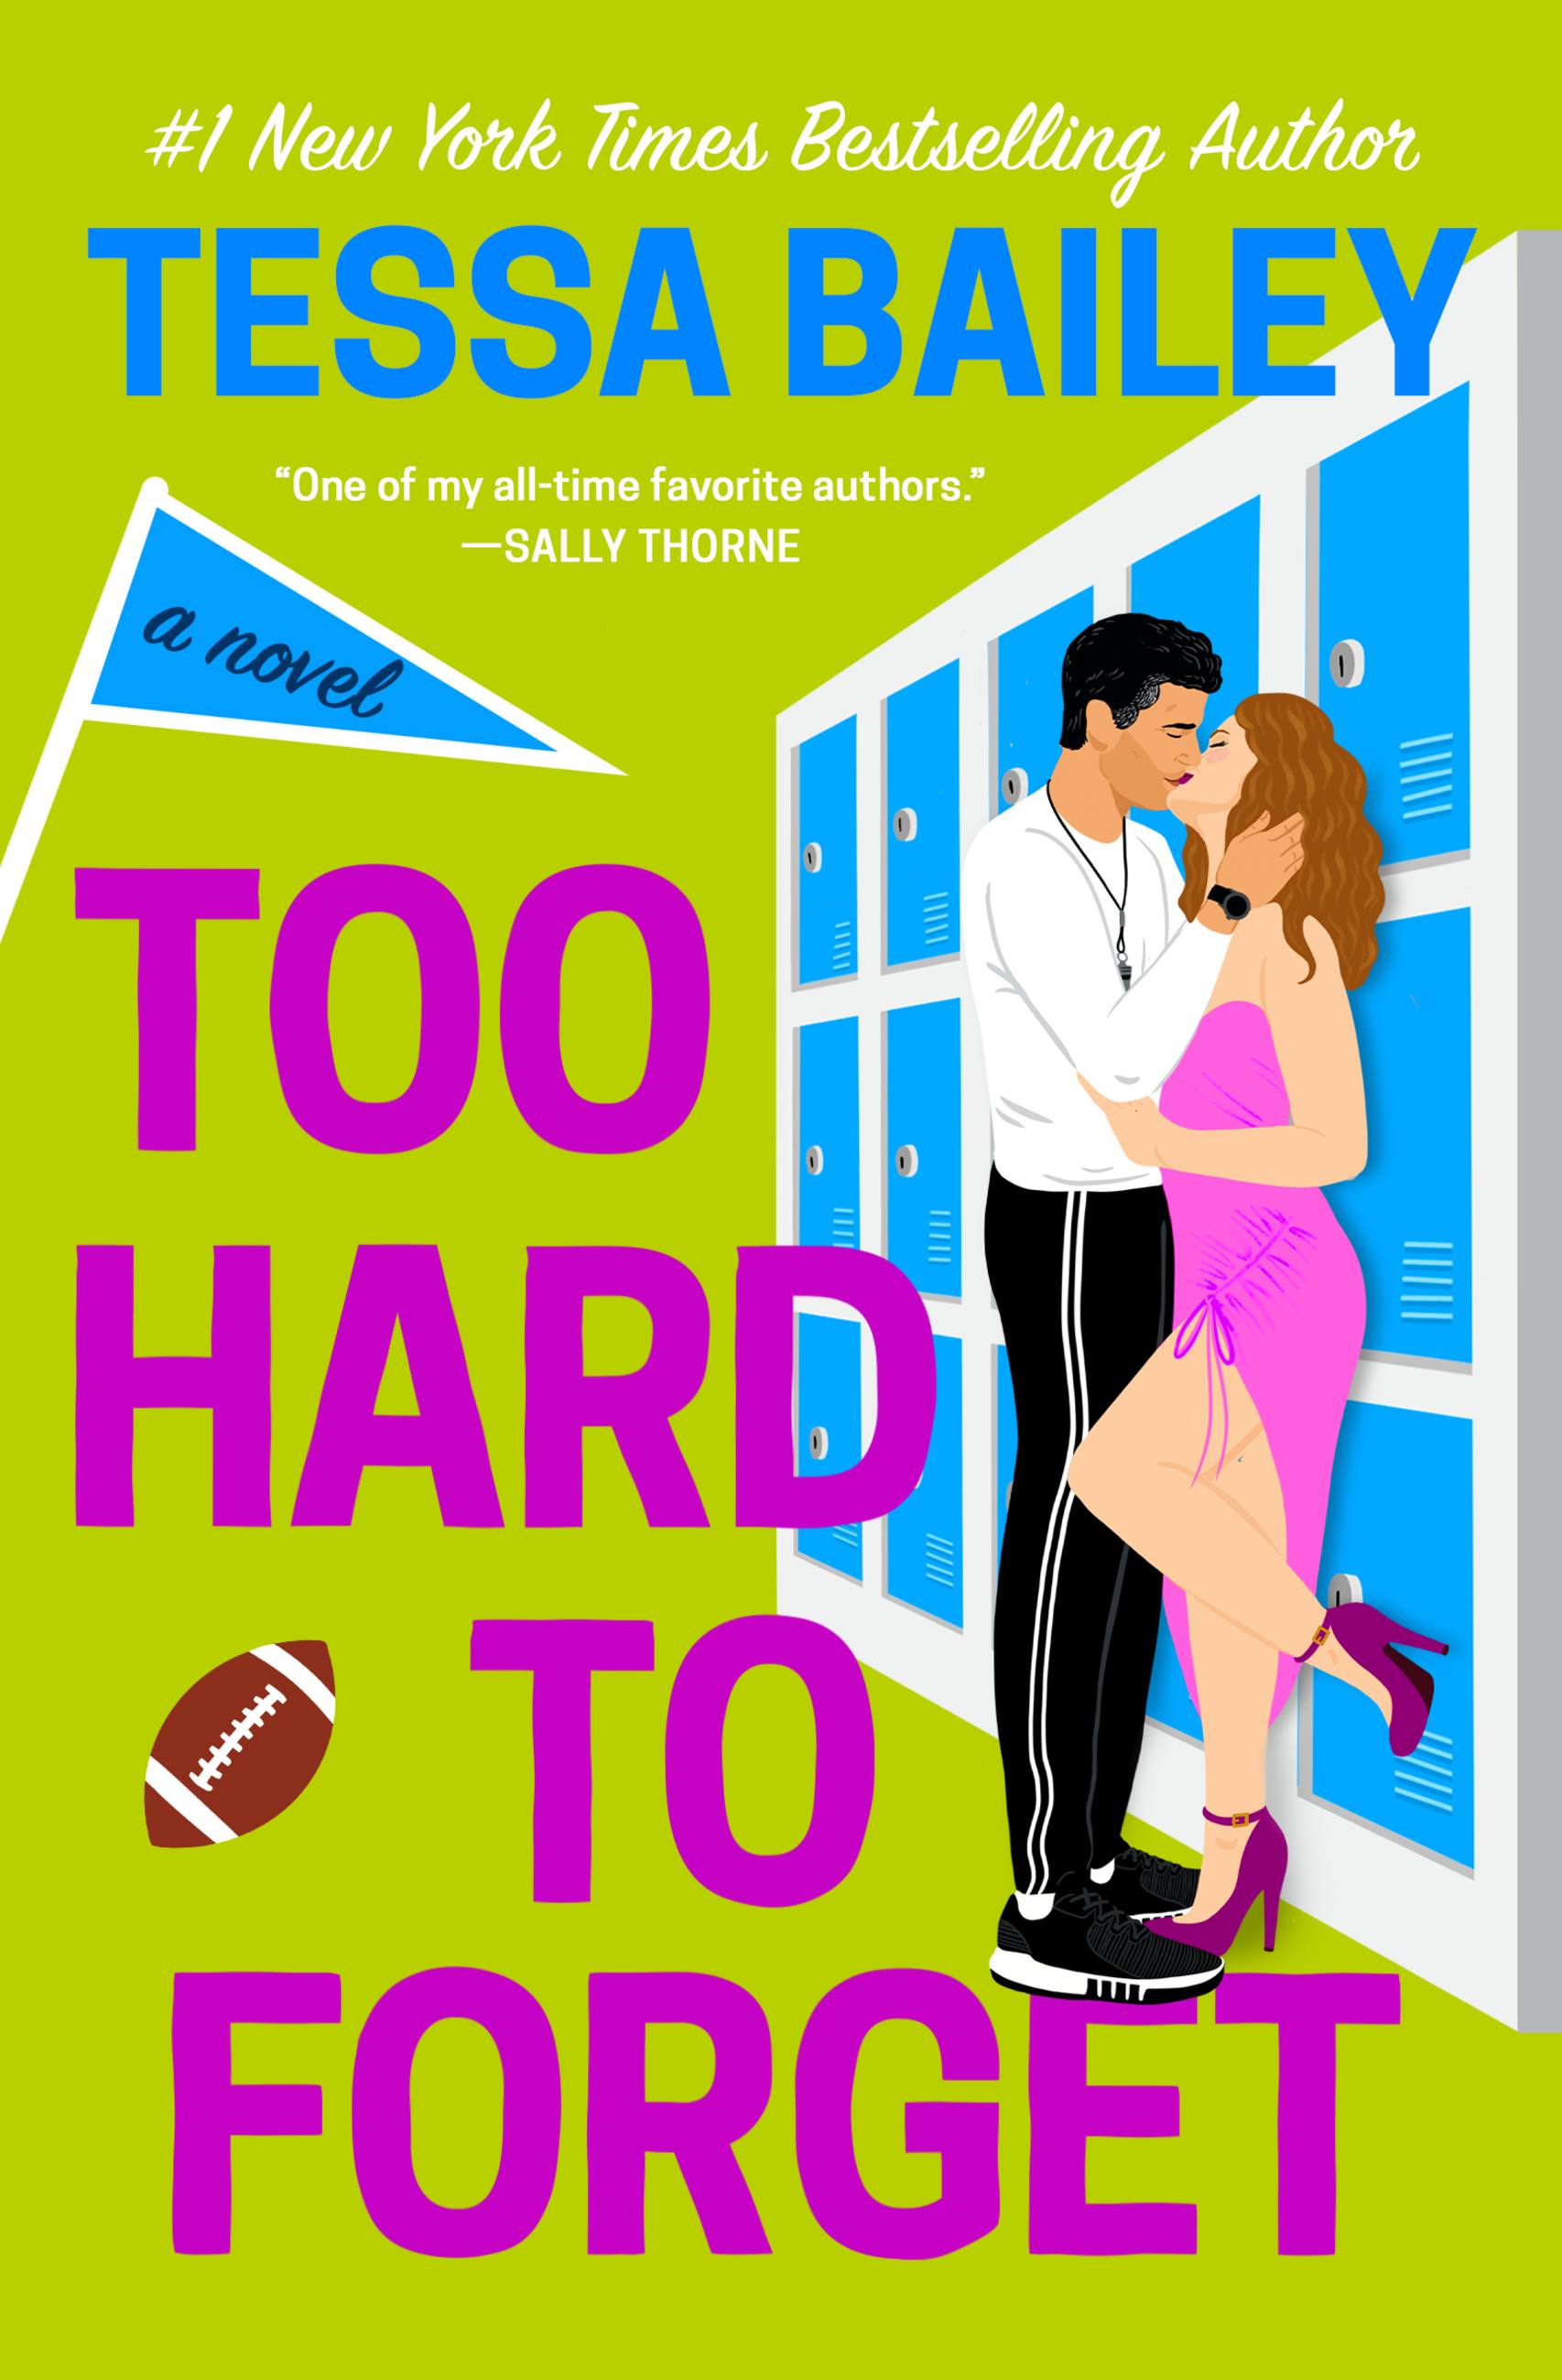 Too Hard to Forget by Tessa Bailey Hachette Book Group pic